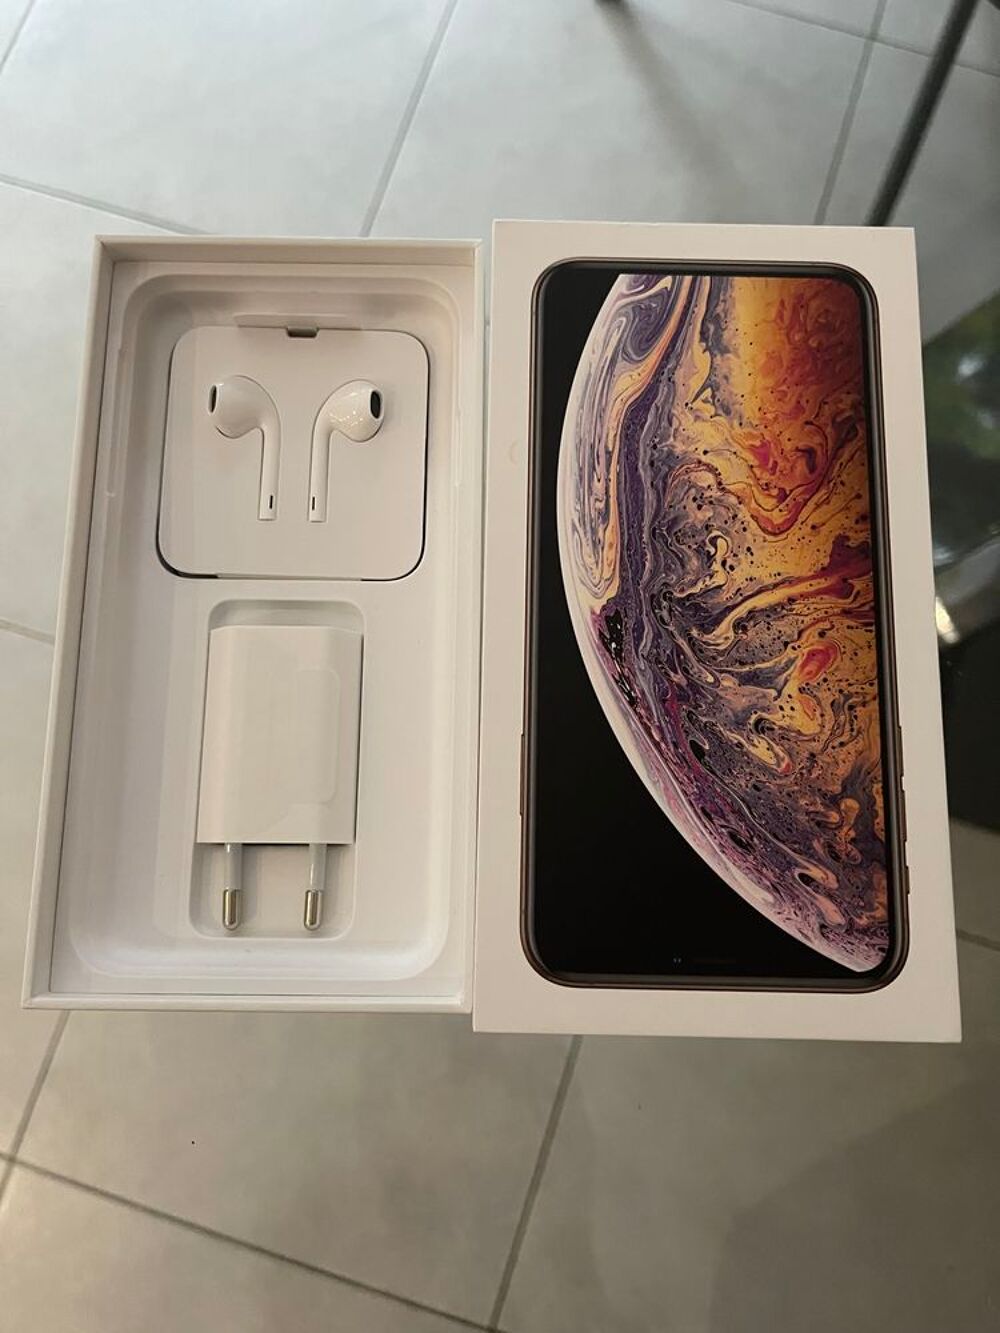 iPhone XS Max or Tlphones et tablettes